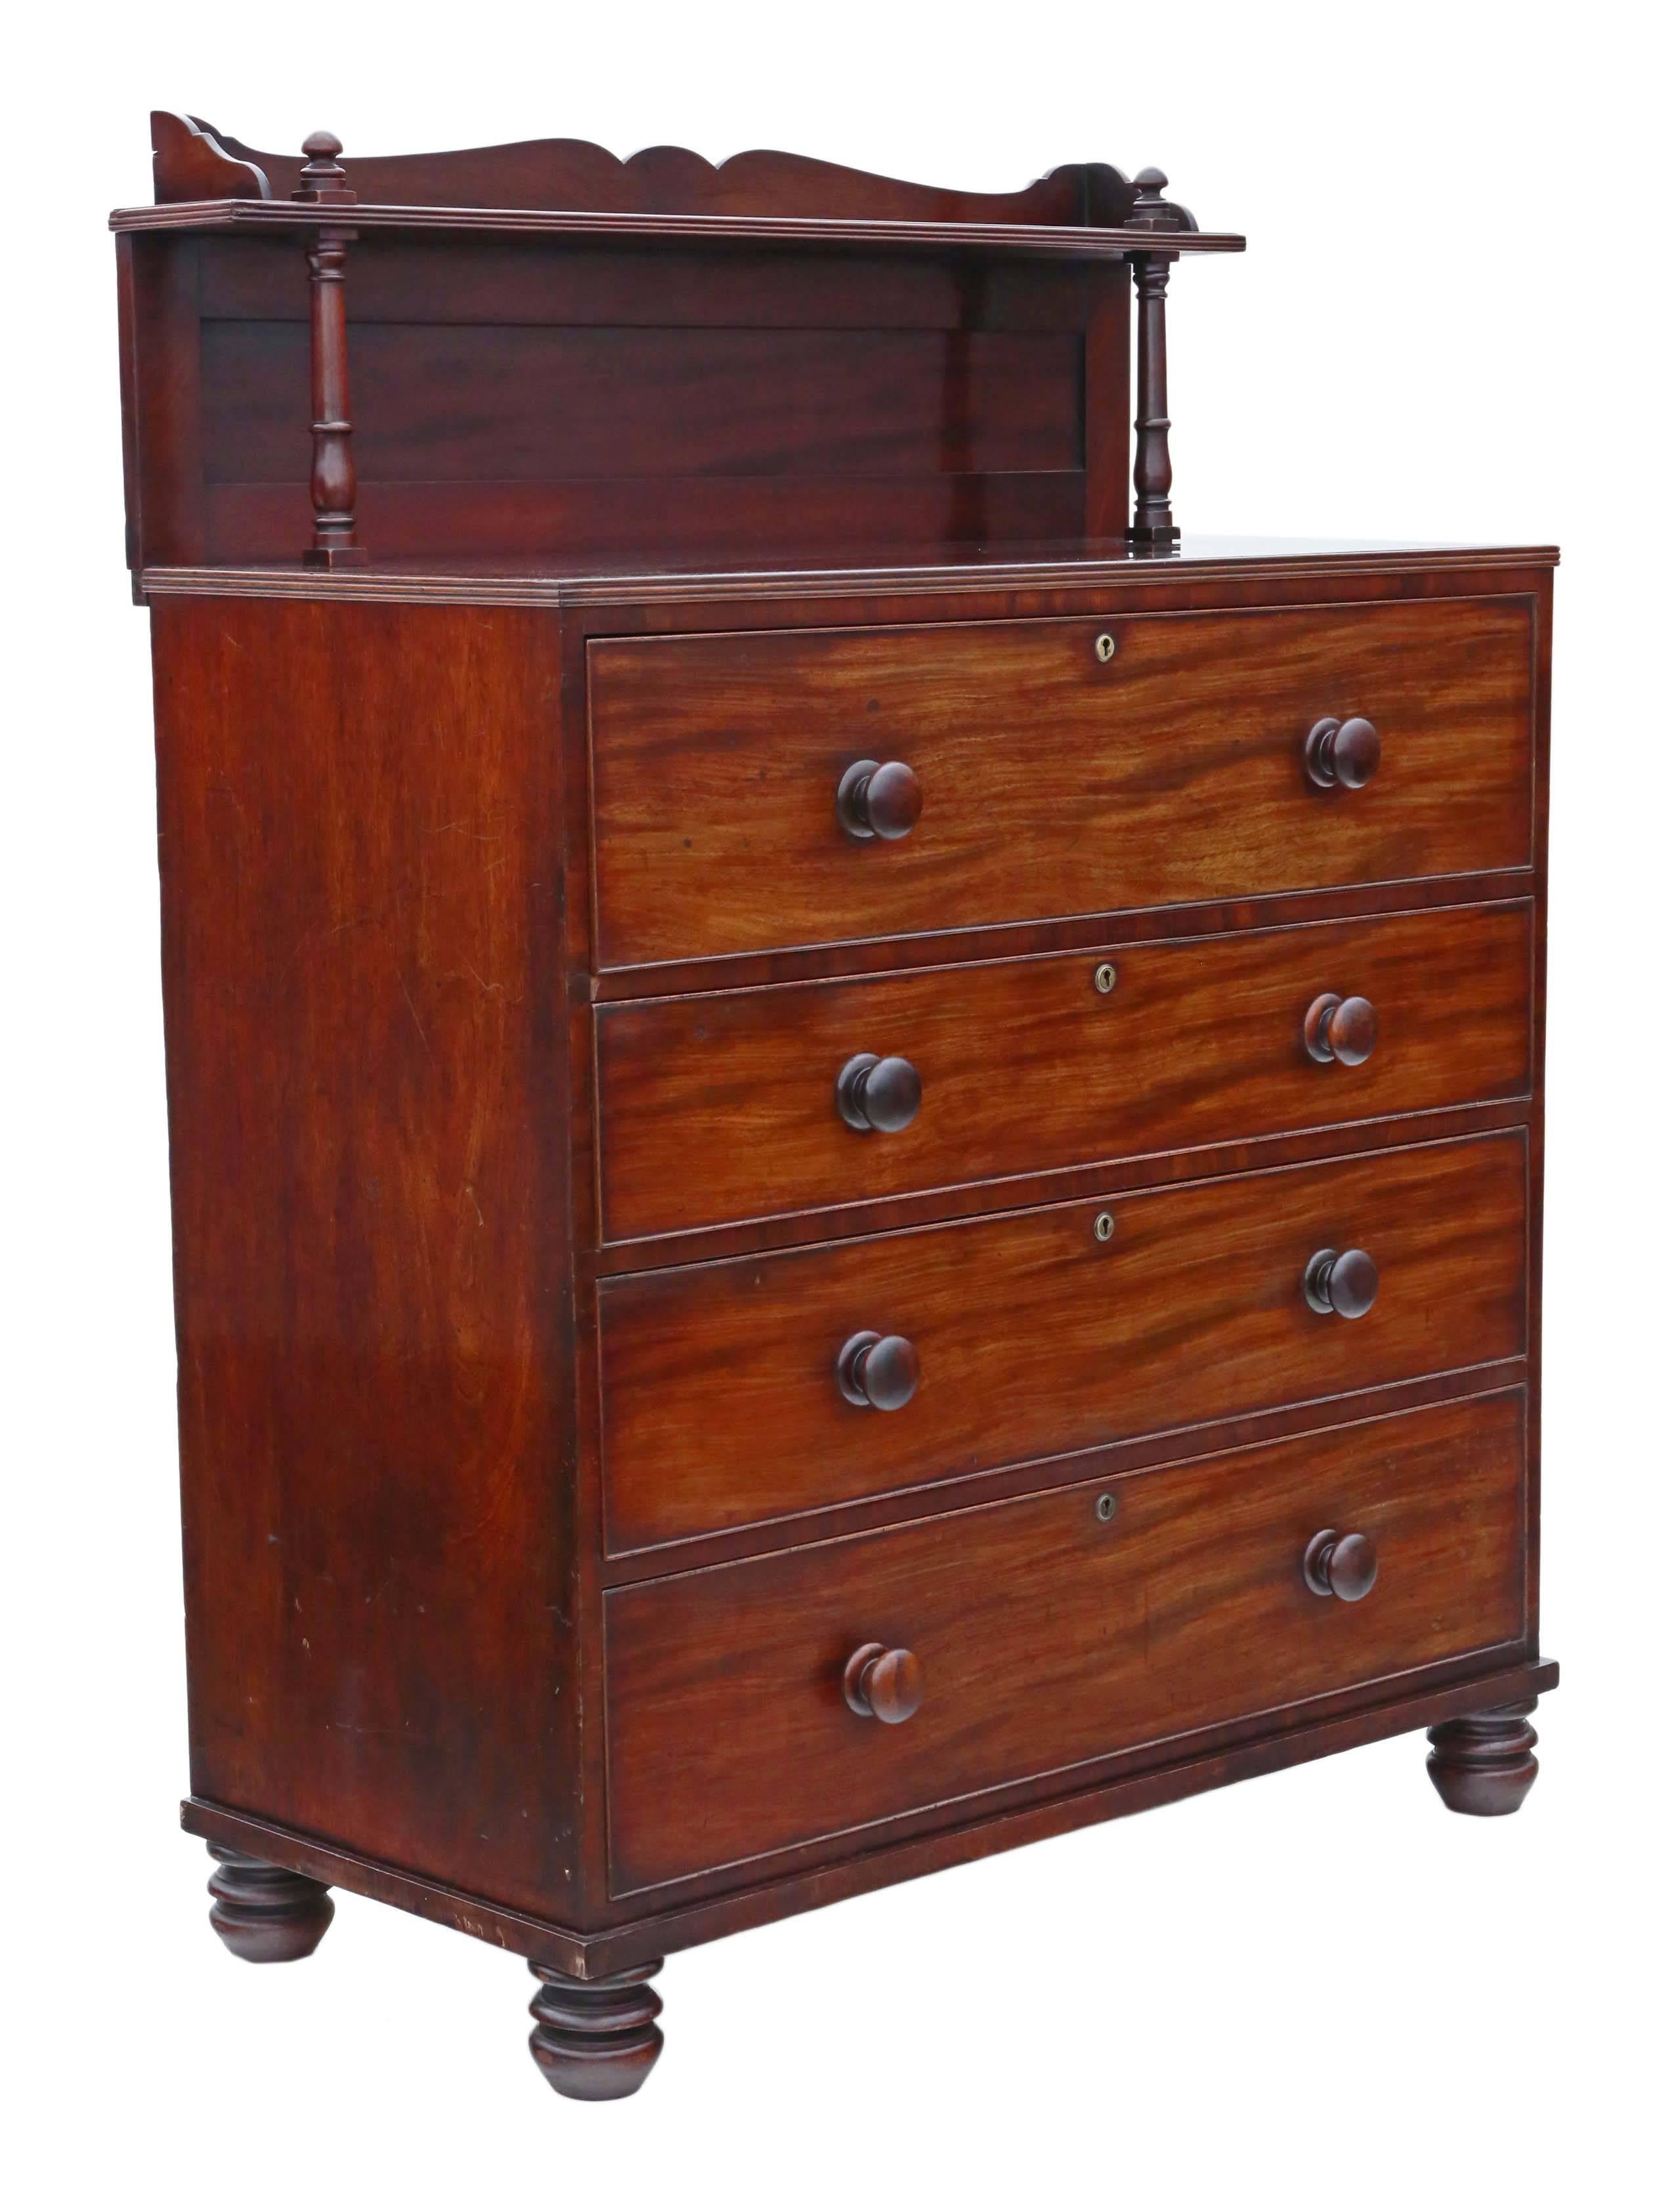 Antique Regency William IV Mahogany Secretaire Desk Writing Chest of Drawers For Sale 5